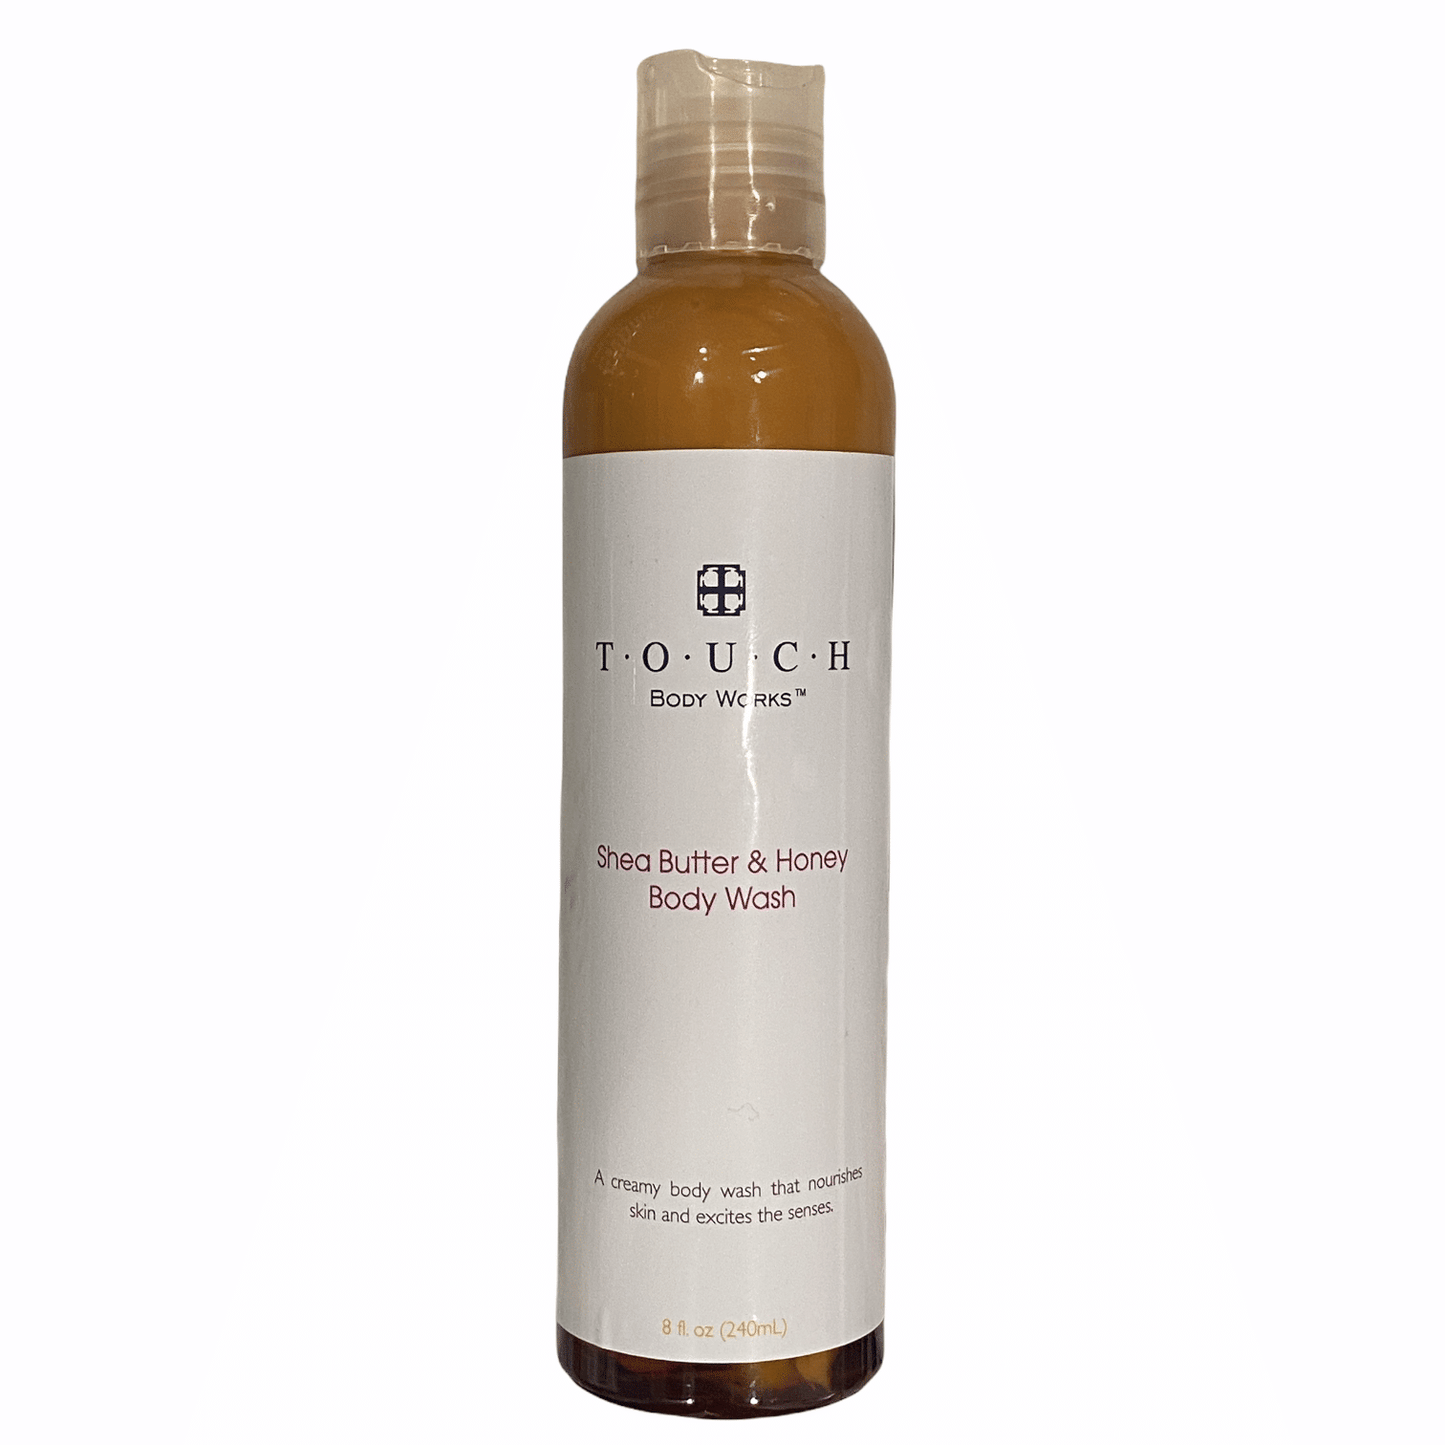 bottle of shea butter and honey body wash hydrate dry skin